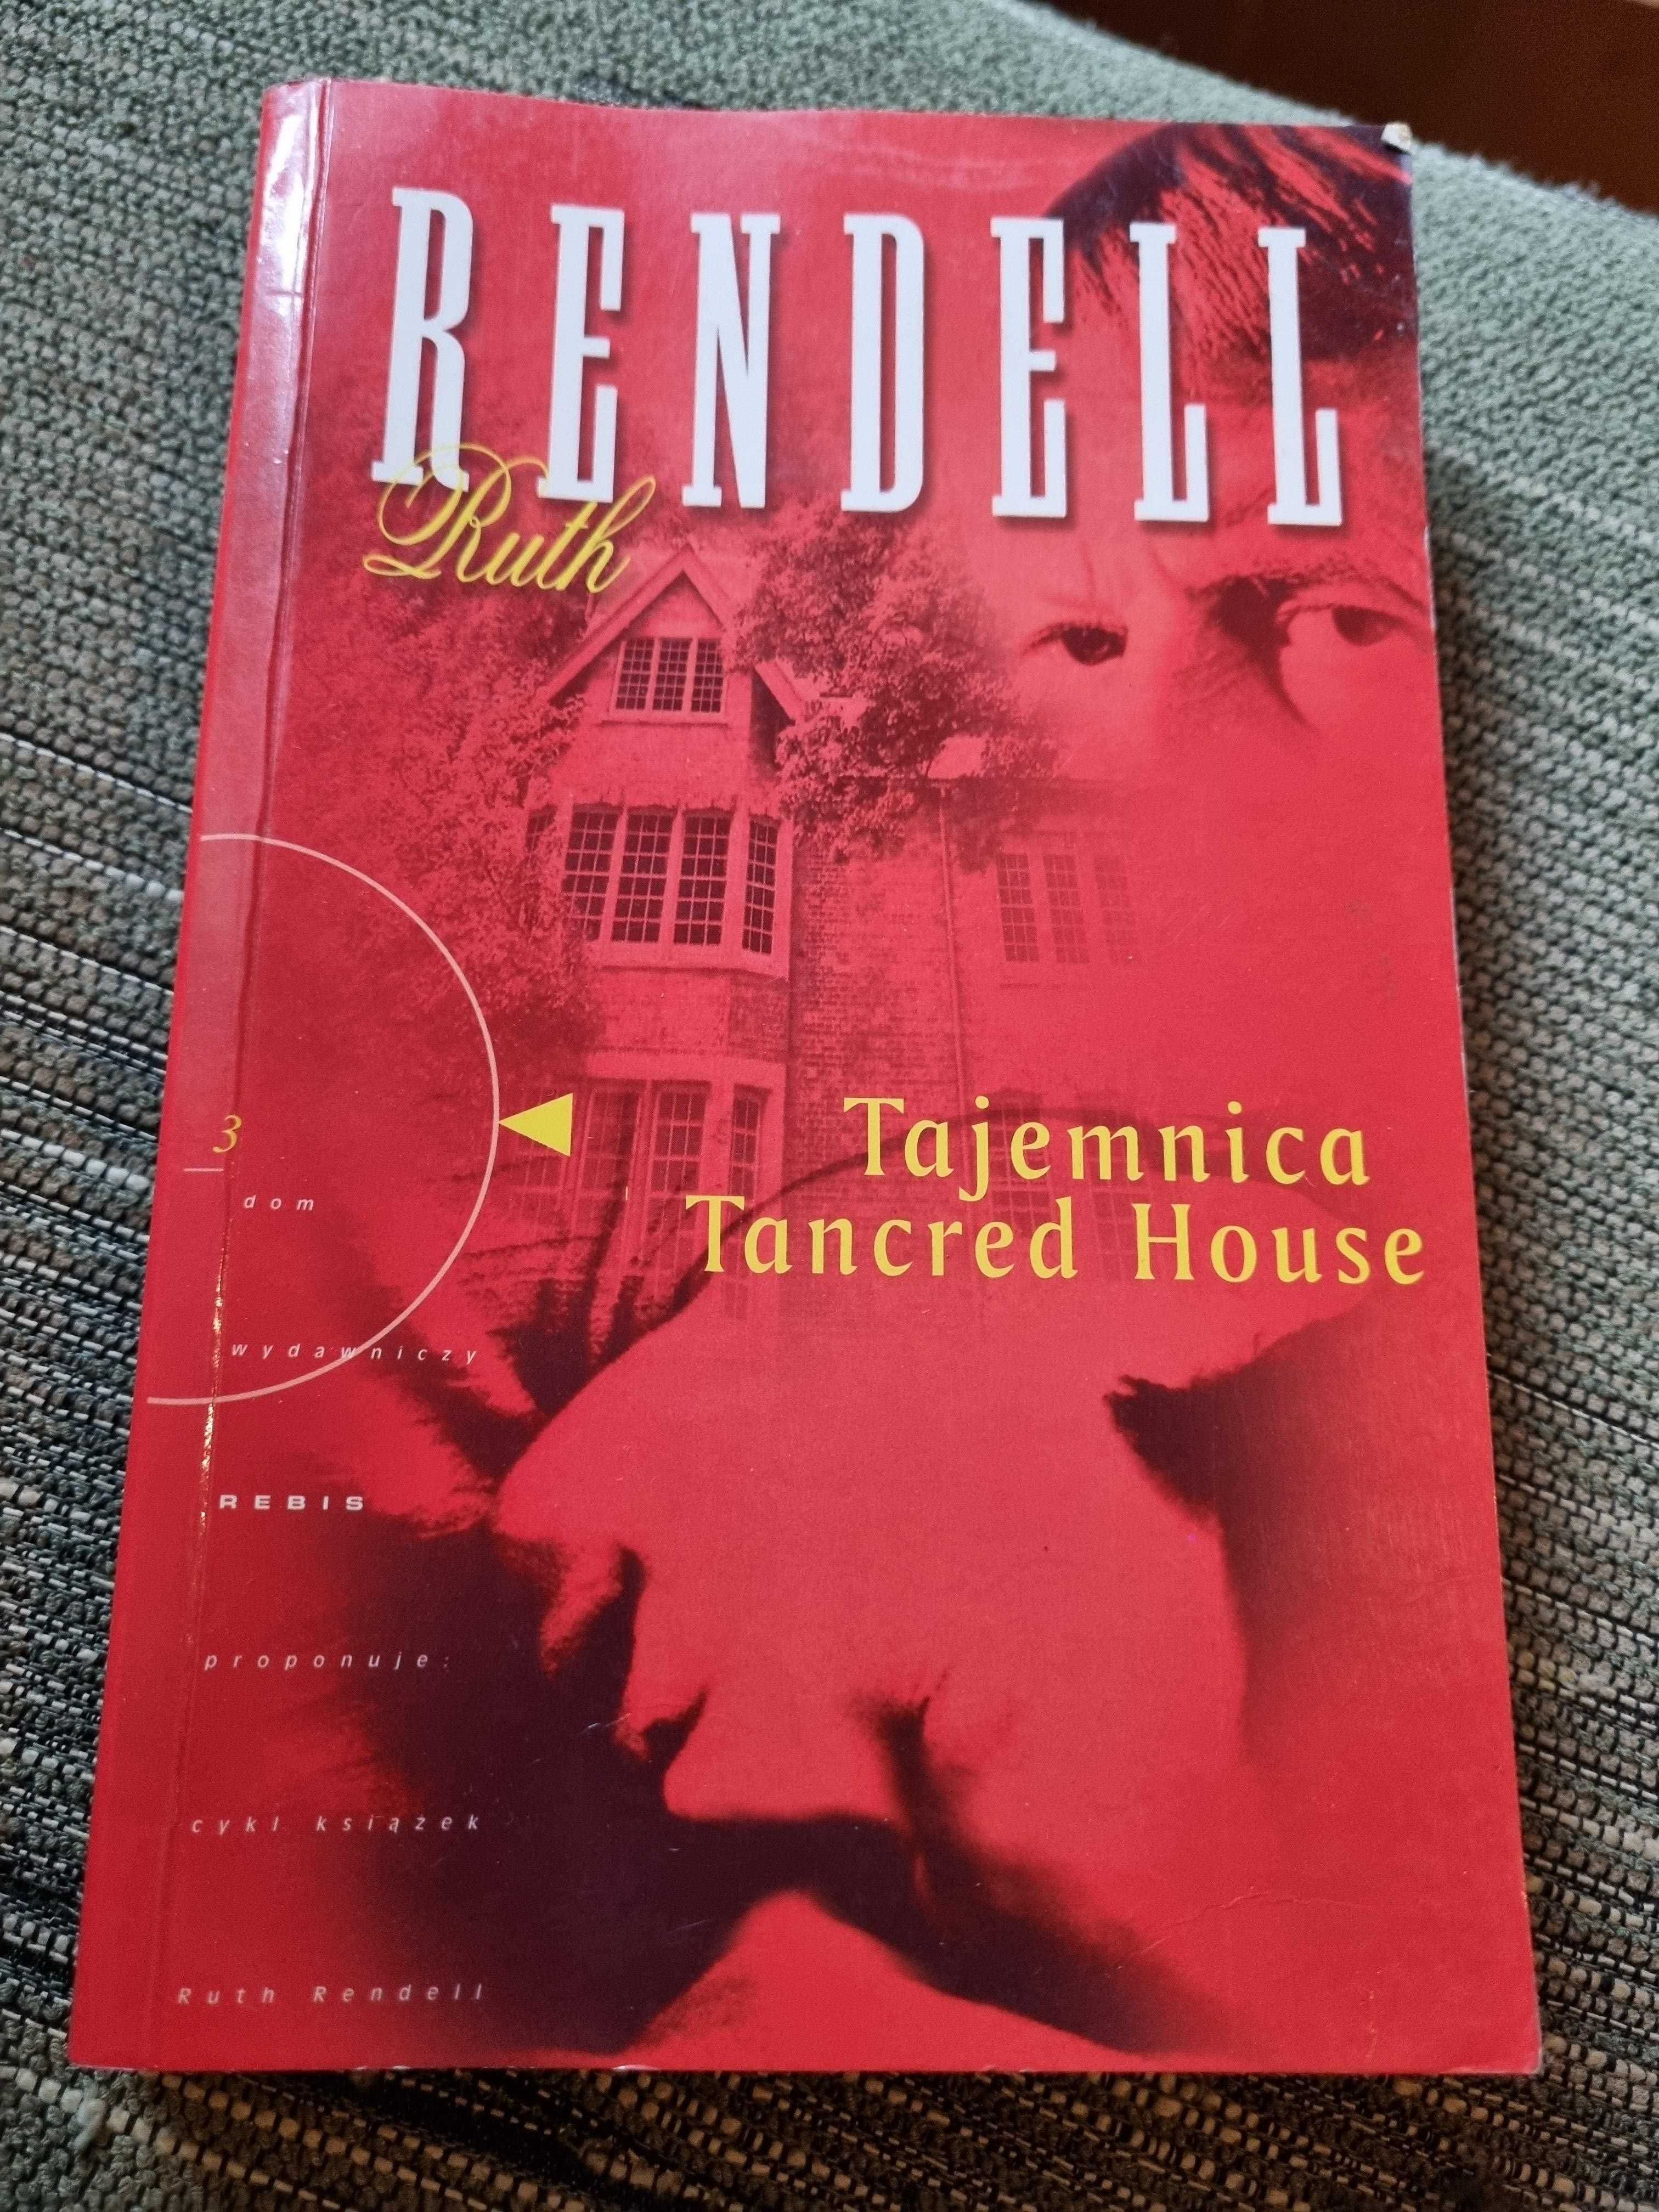 Tajemnica Tancred House, Ruth Rendell, 1996r